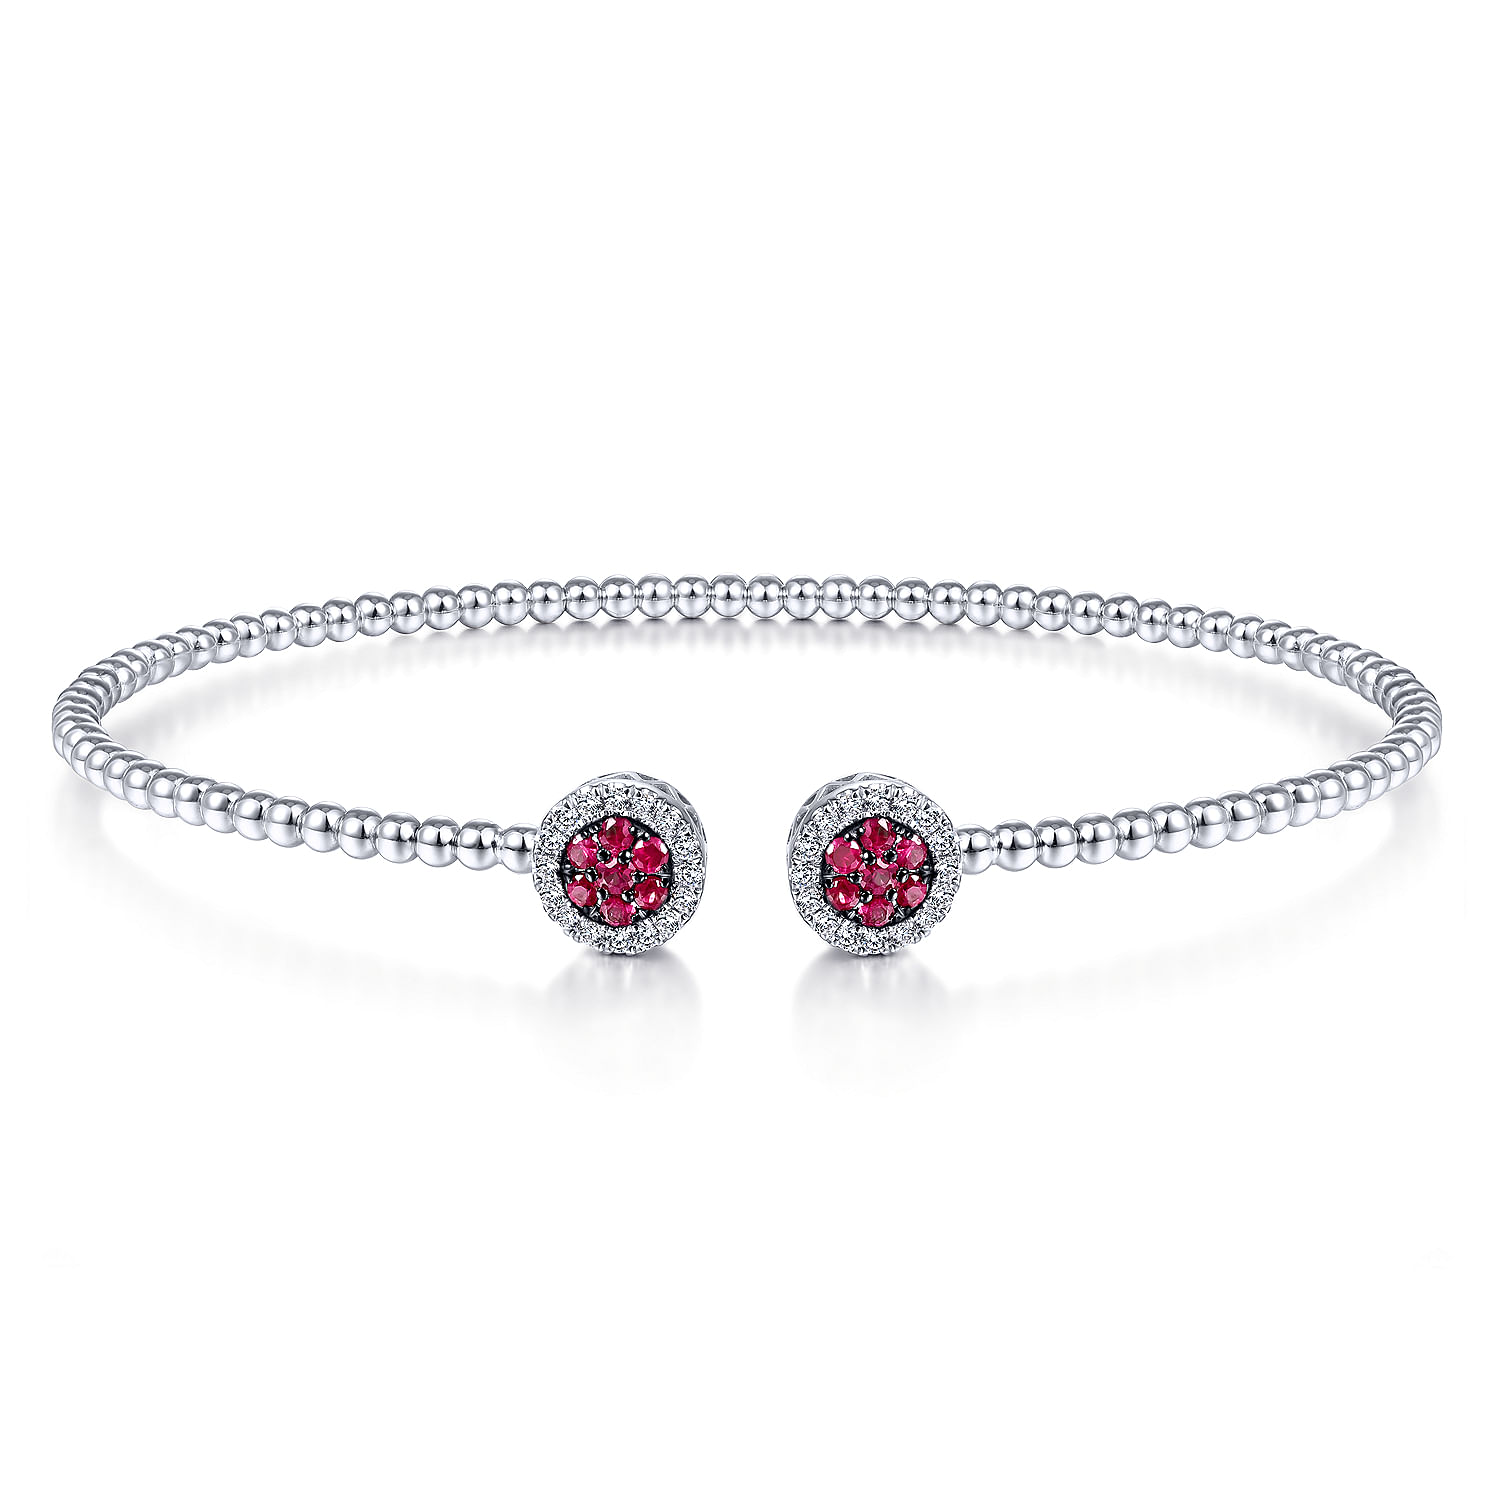 14K White Gold Bujukan Bead Cuff Bracelet with Ruby and Diamond Halo Caps